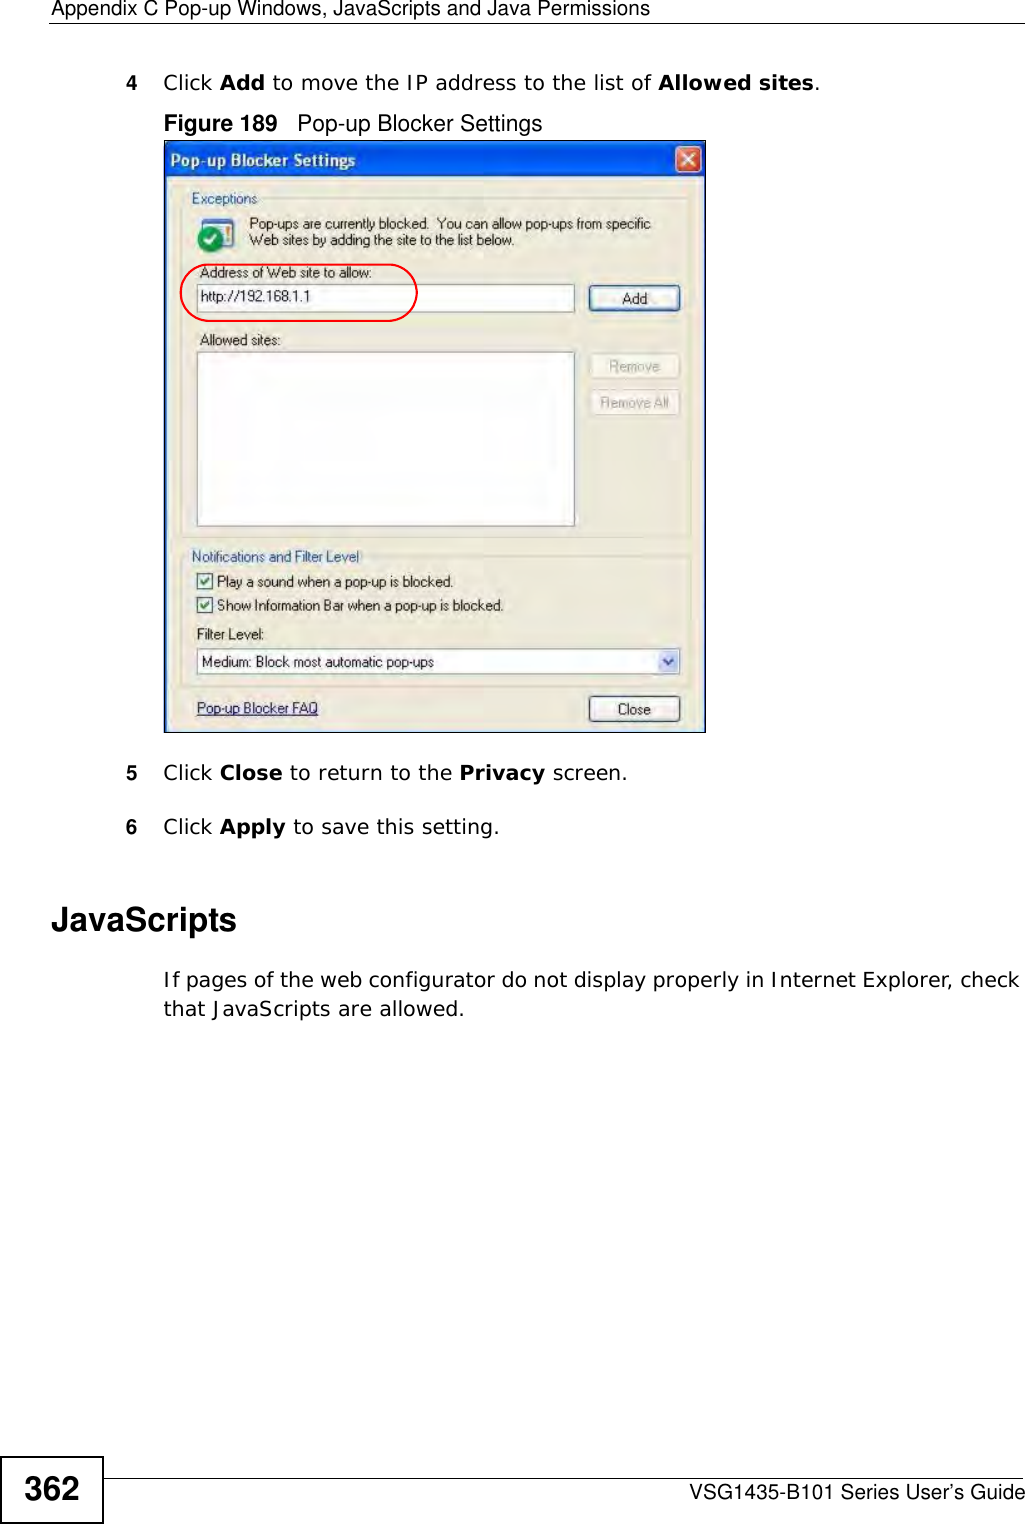 Appendix C Pop-up Windows, JavaScripts and Java PermissionsVSG1435-B101 Series User’s Guide3624Click Add to move the IP address to the list of Allowed sites.Figure 189   Pop-up Blocker Settings5Click Close to return to the Privacy screen. 6Click Apply to save this setting. JavaScriptsIf pages of the web configurator do not display properly in Internet Explorer, check that JavaScripts are allowed. 